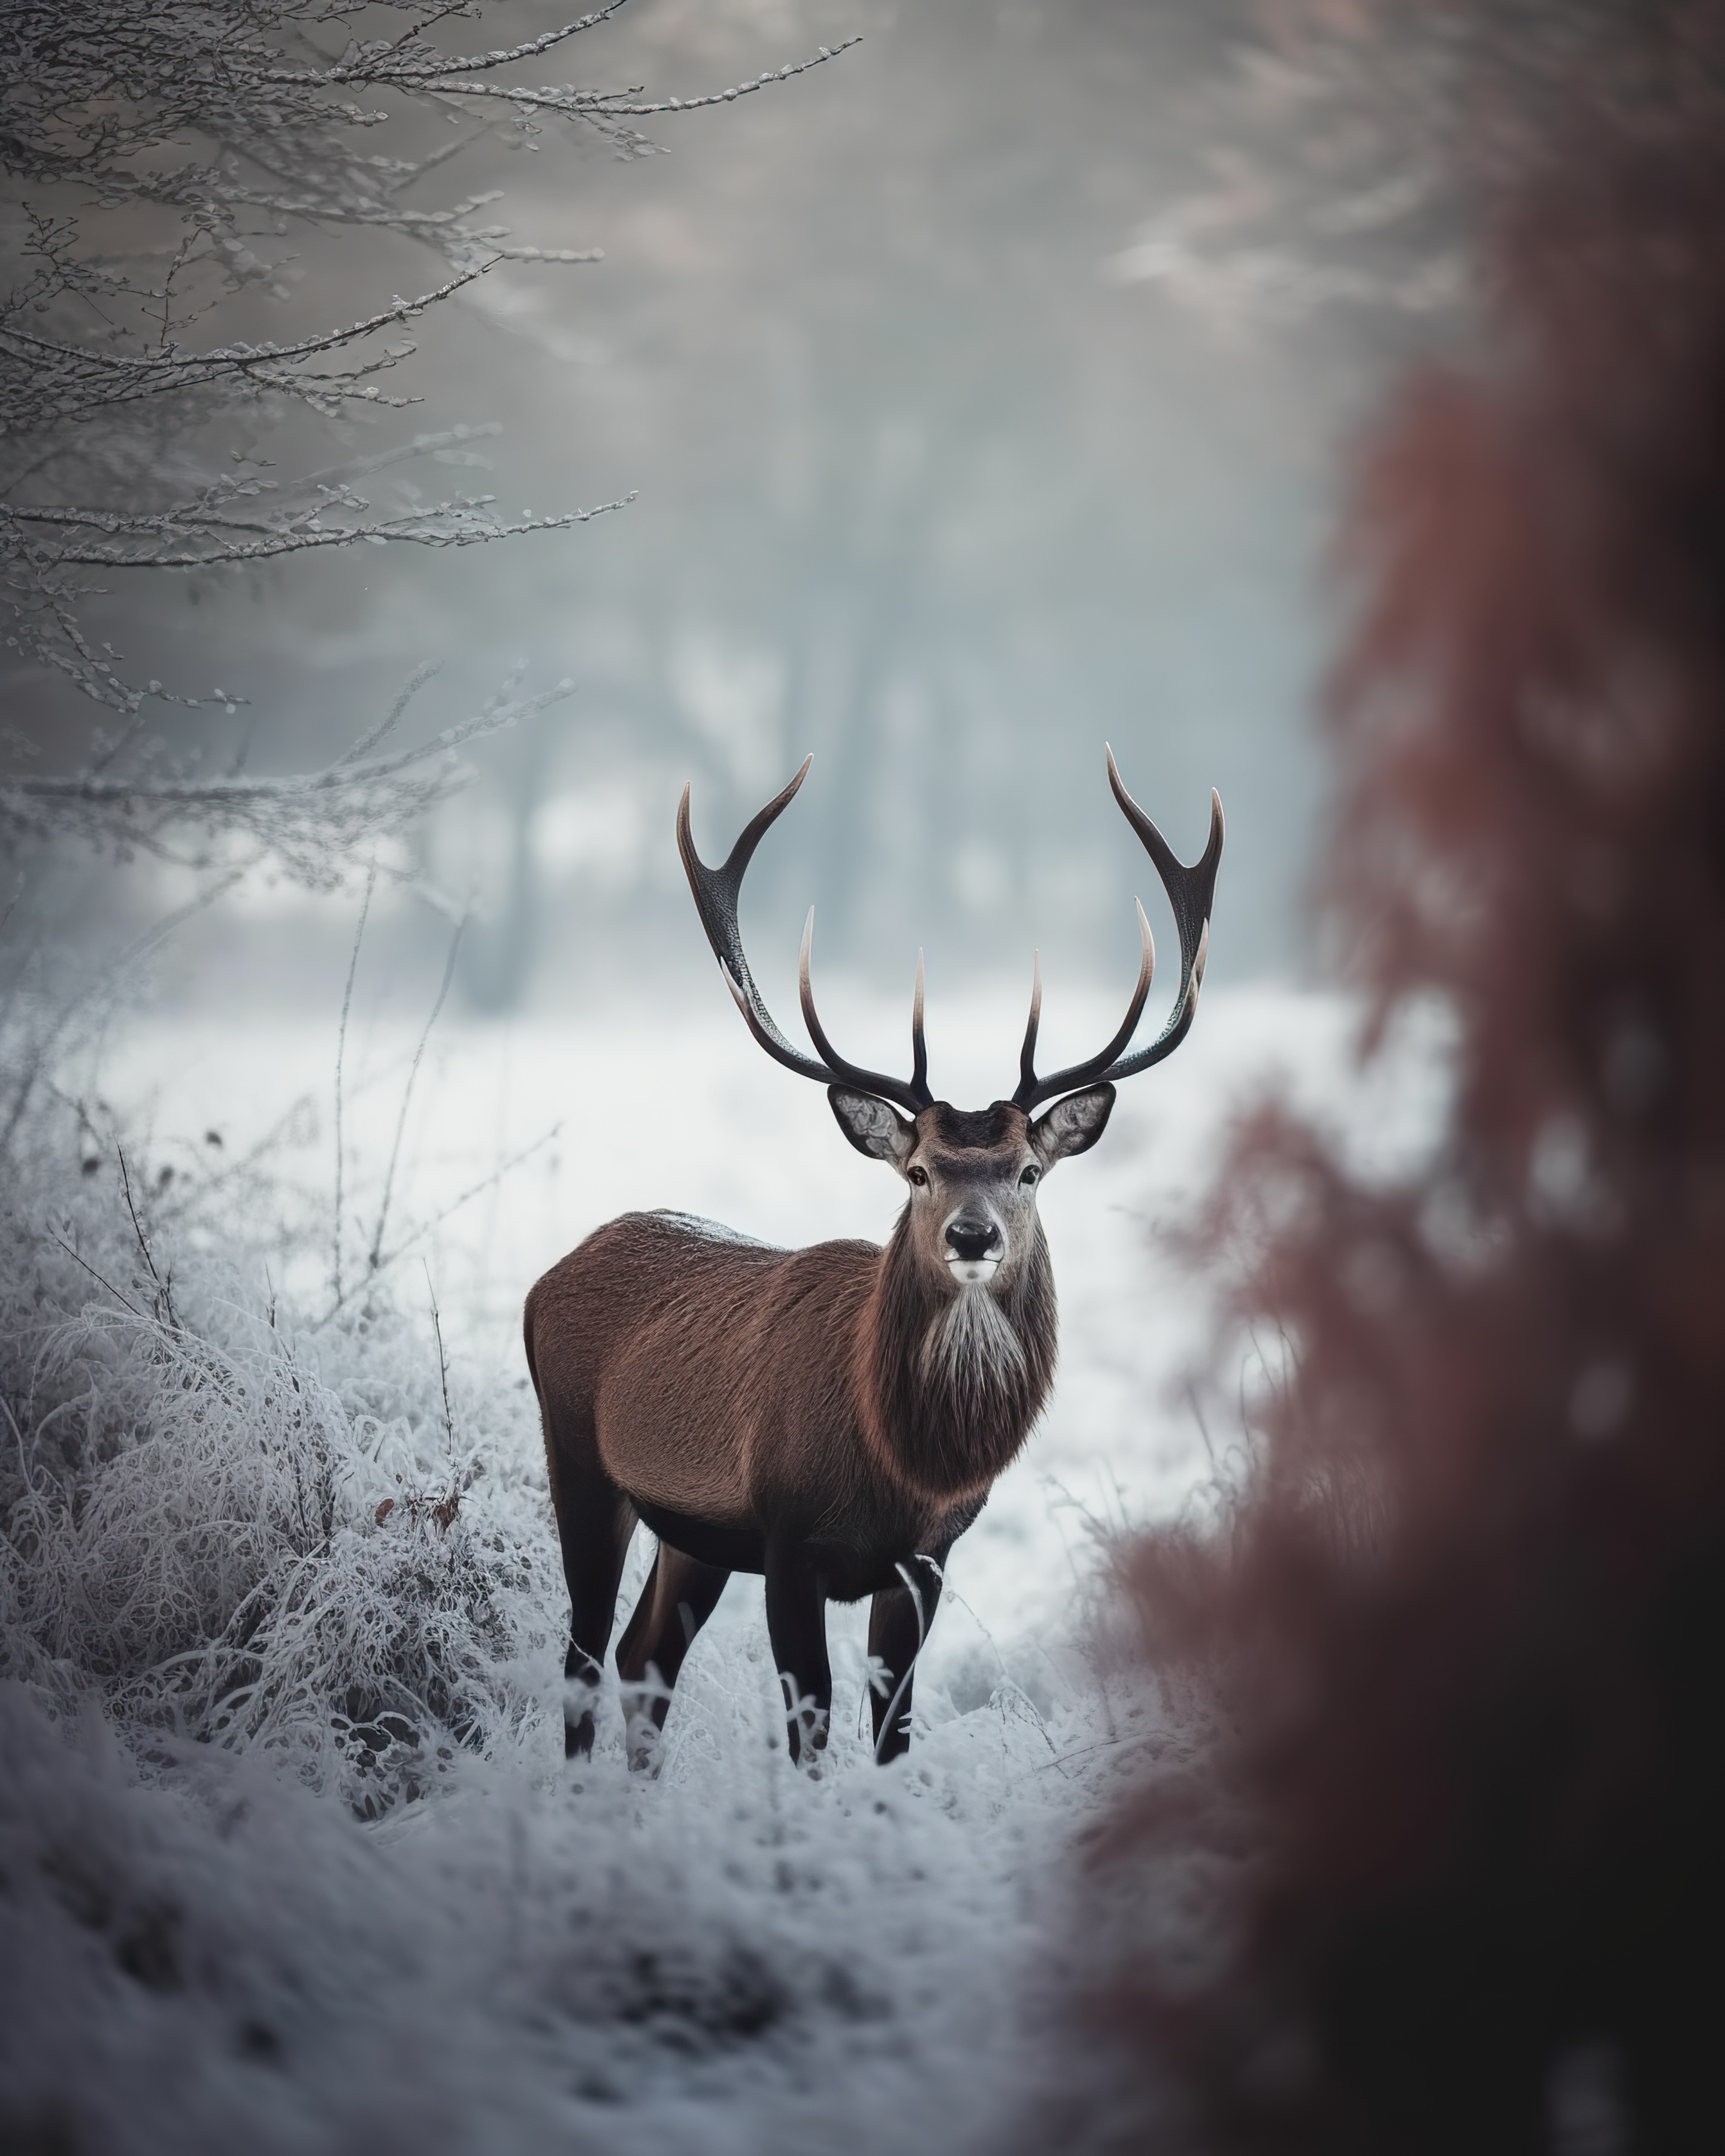 Red deer stag in snowy forest